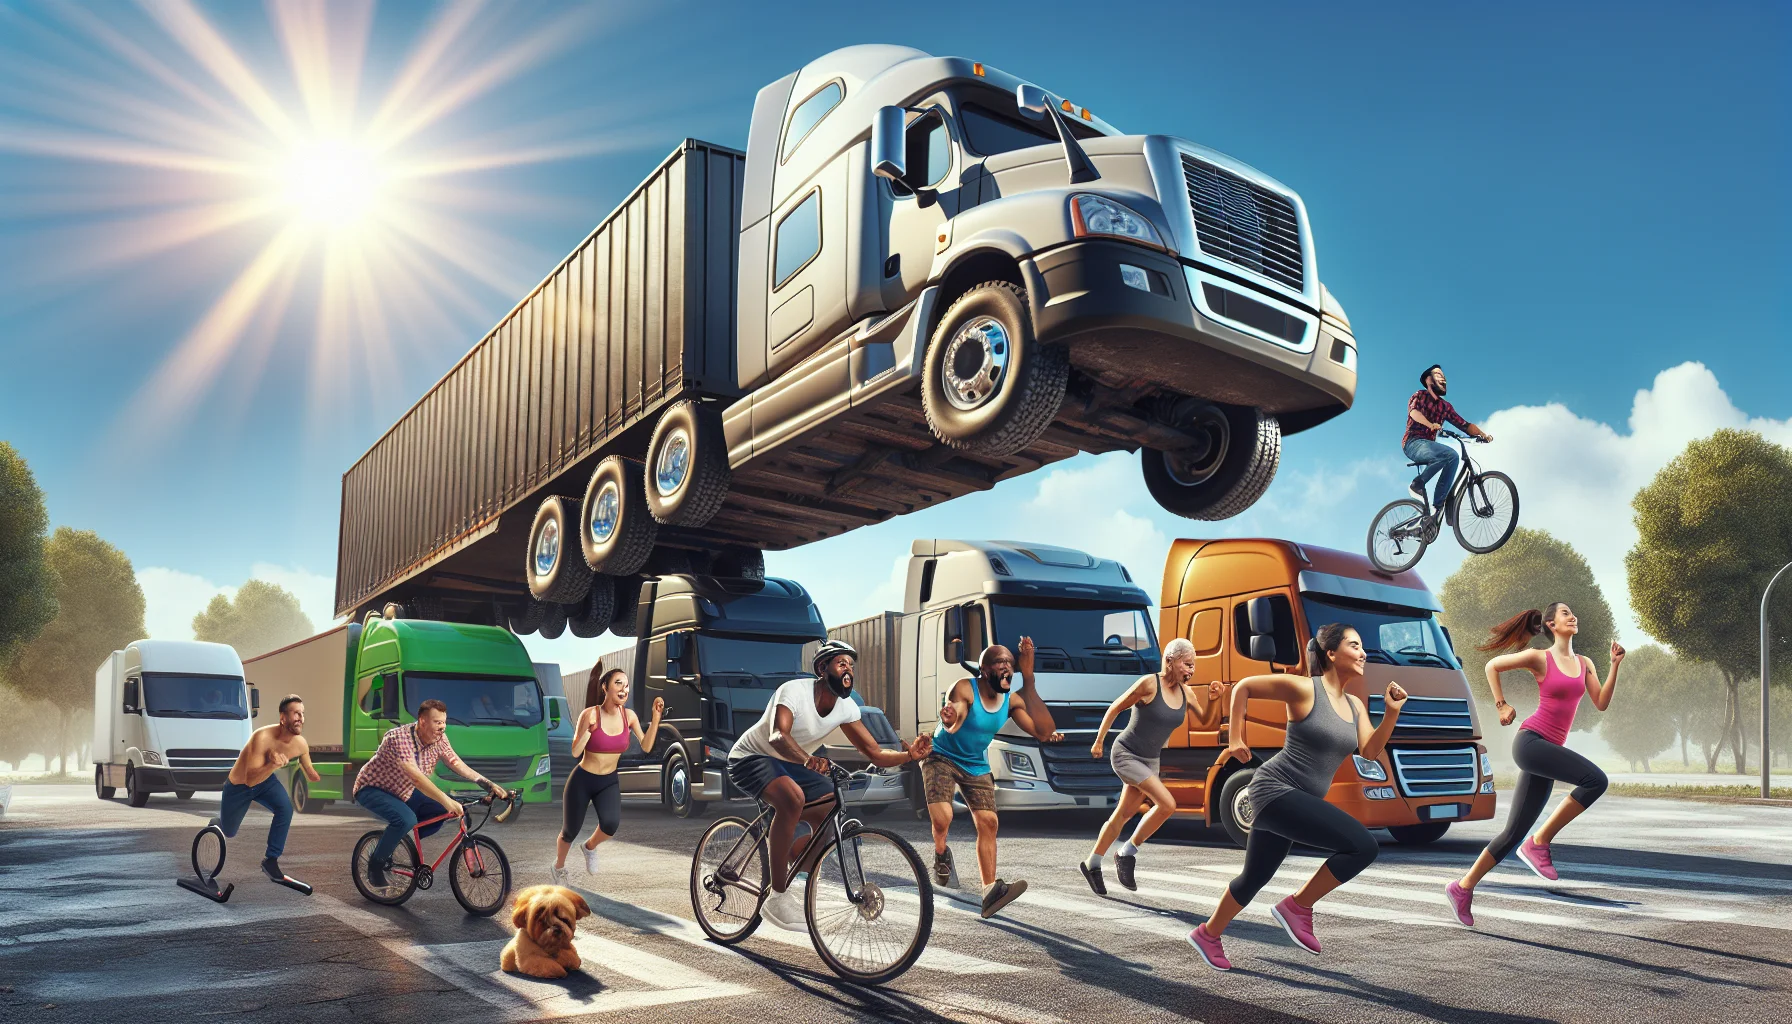 Conjure an entertaining and whimsical image presenting a cartoonish large truck leapfrogging over other parked trucks in an urban setting. In the foreground, a diverse group of people, including a Hispanic male jogger, a Black female cyclist, and a Middle-Eastern elderly couple walking a dog, are inspired by this spectacle and vigorously taking up various forms exercise. Radiant sun shines overhead, casting warm, playful light on the whole scene, sparking laughter and a sense of novelty, giving an unexpected twist to staying fit.